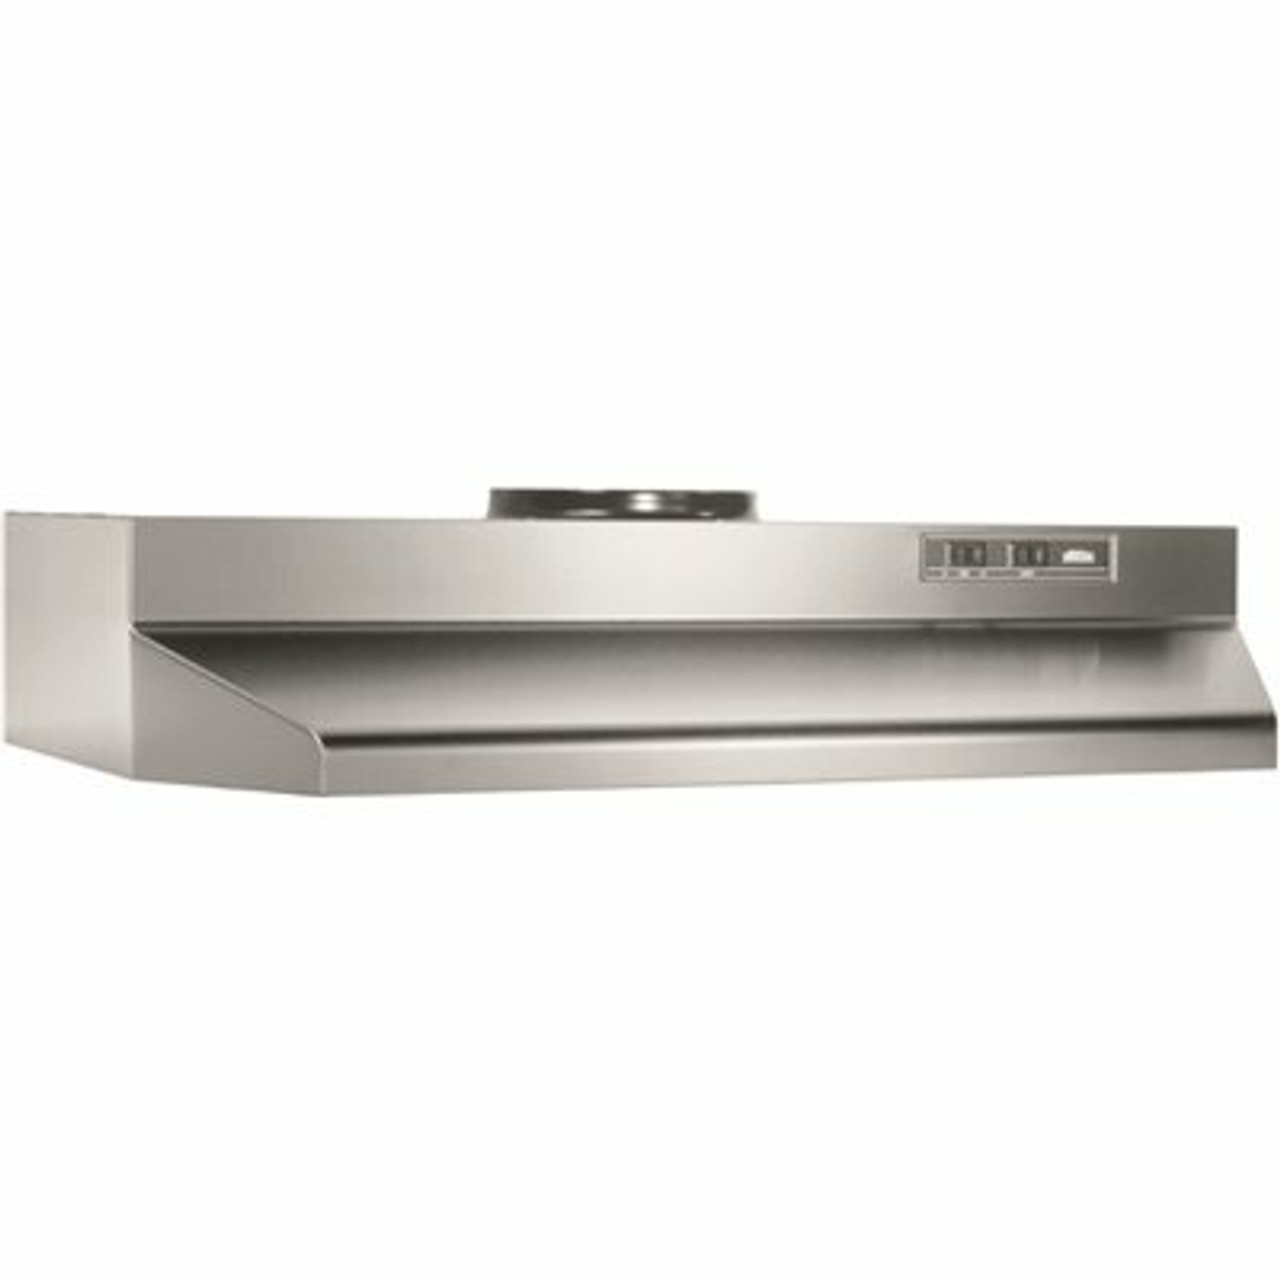 Buez2 30 In. 230 Max Blower Cfm Ducted Under-Cabinet Range Hood With Light And Easy Install System In Stainless Steel